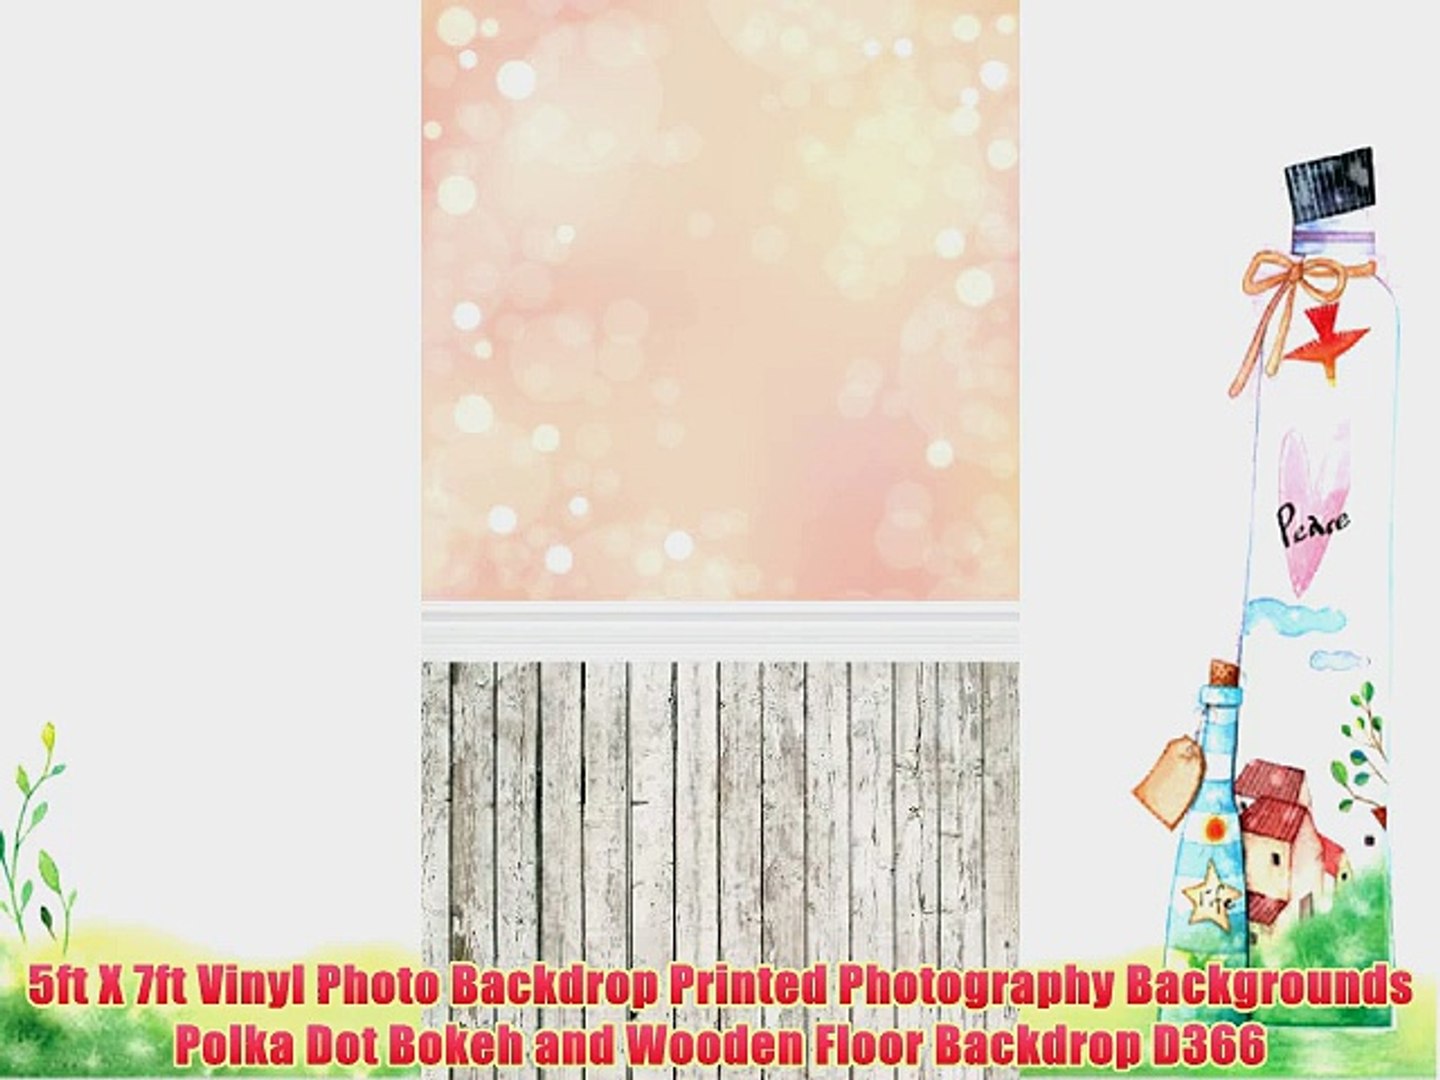 5ft X 7ft Vinyl Photo Backdrop Printed Photography Backgrounds